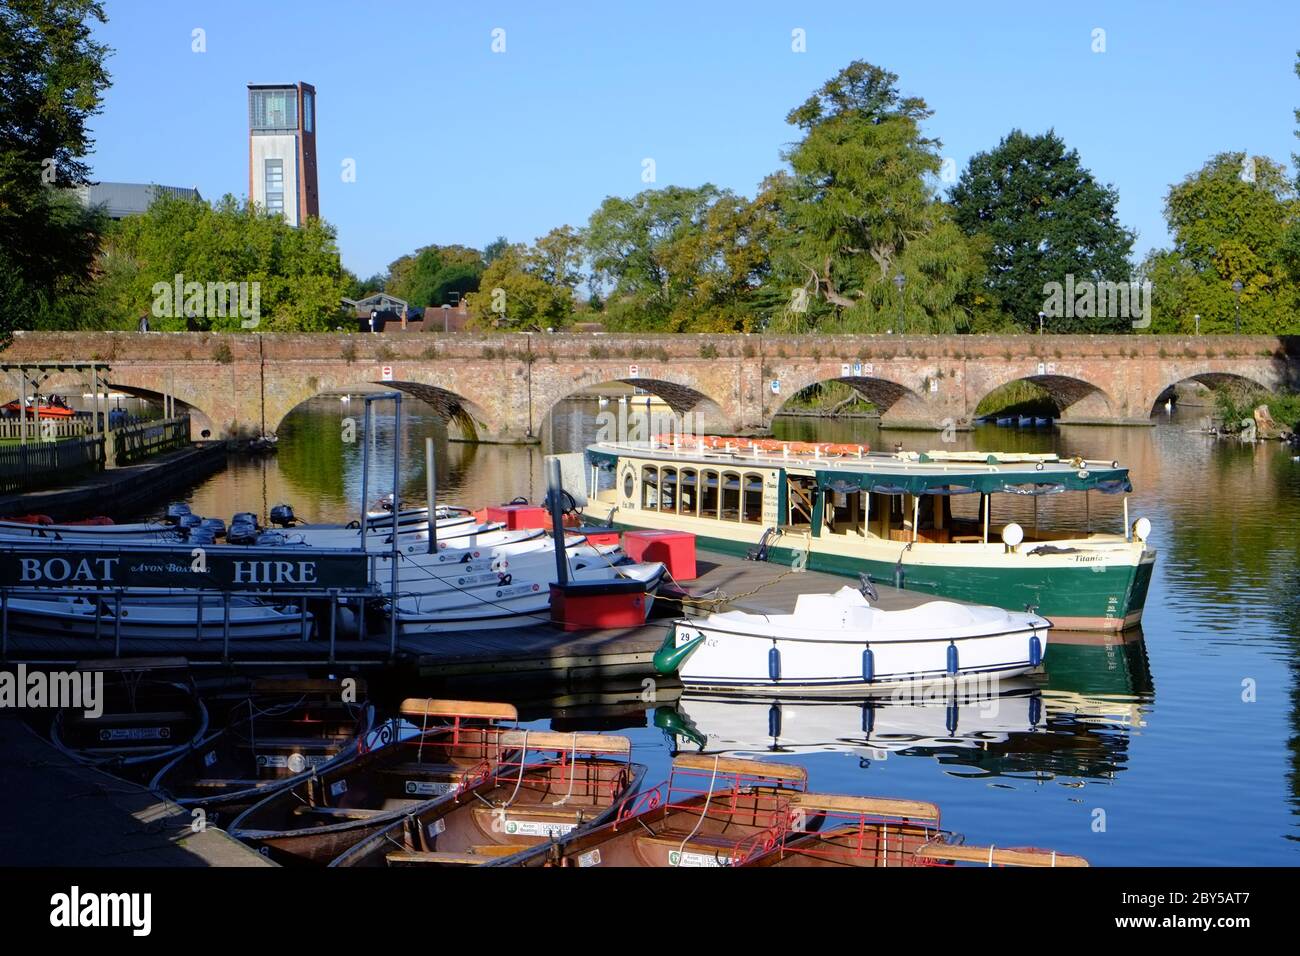 Tour boats and rowing boats on the River Avon, at Stratford-upon-Avon, Warwickshire, England, UK Stock Photo